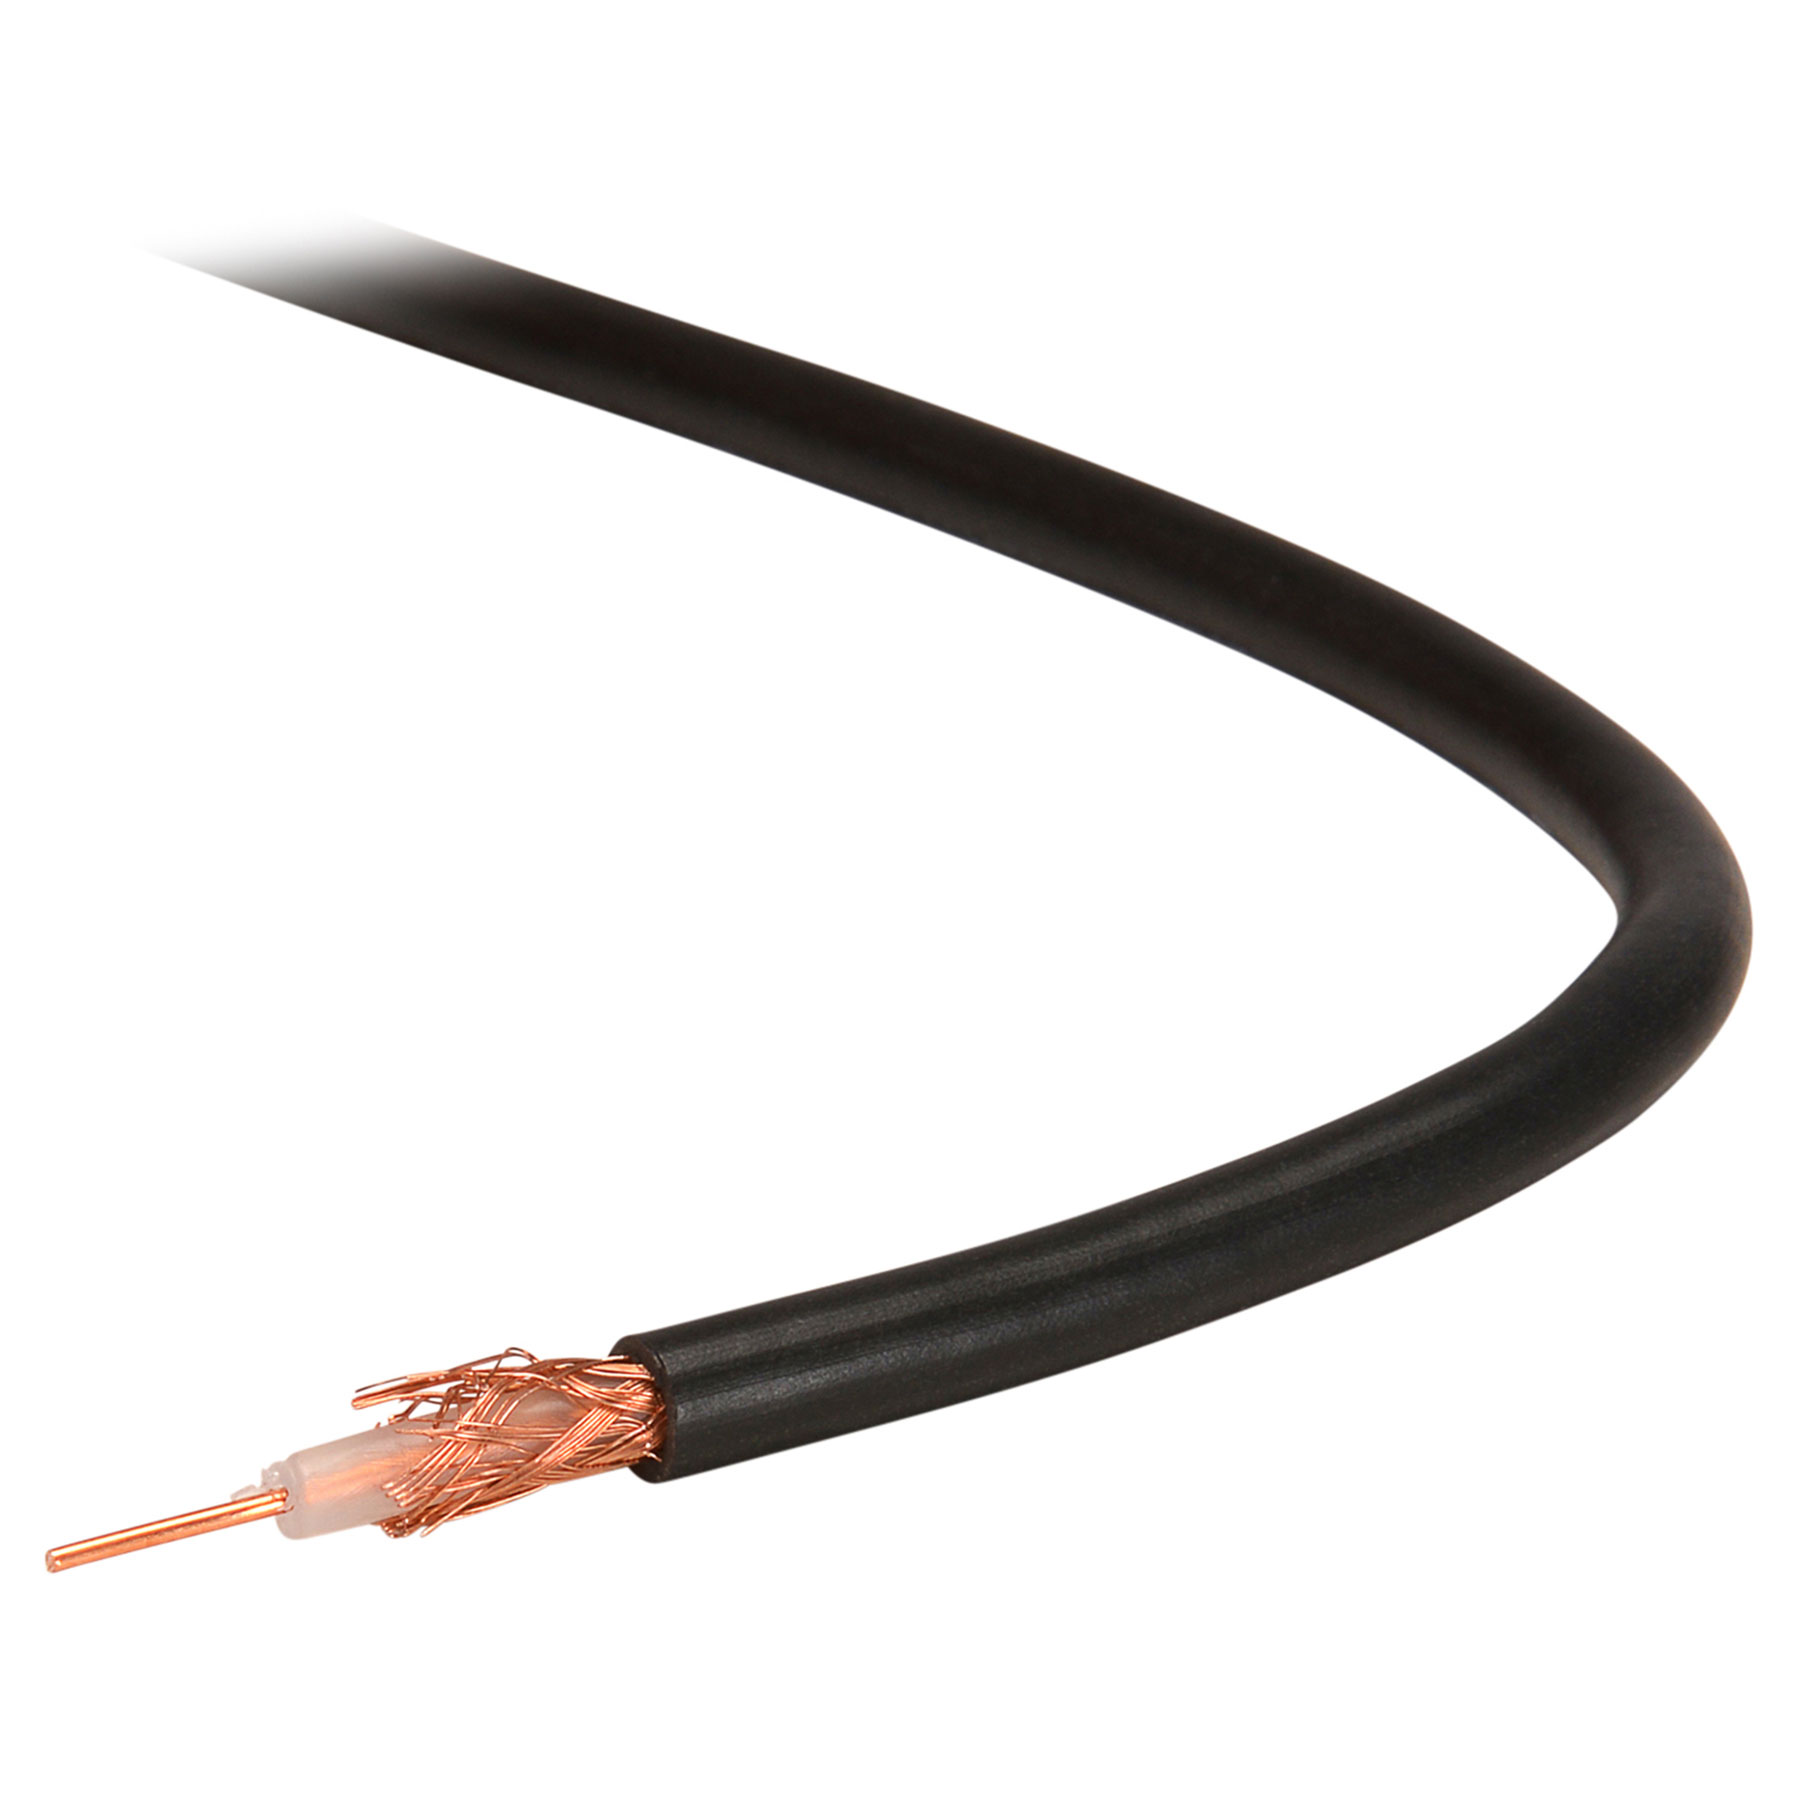 tinhte_coaxial_cable.jpg